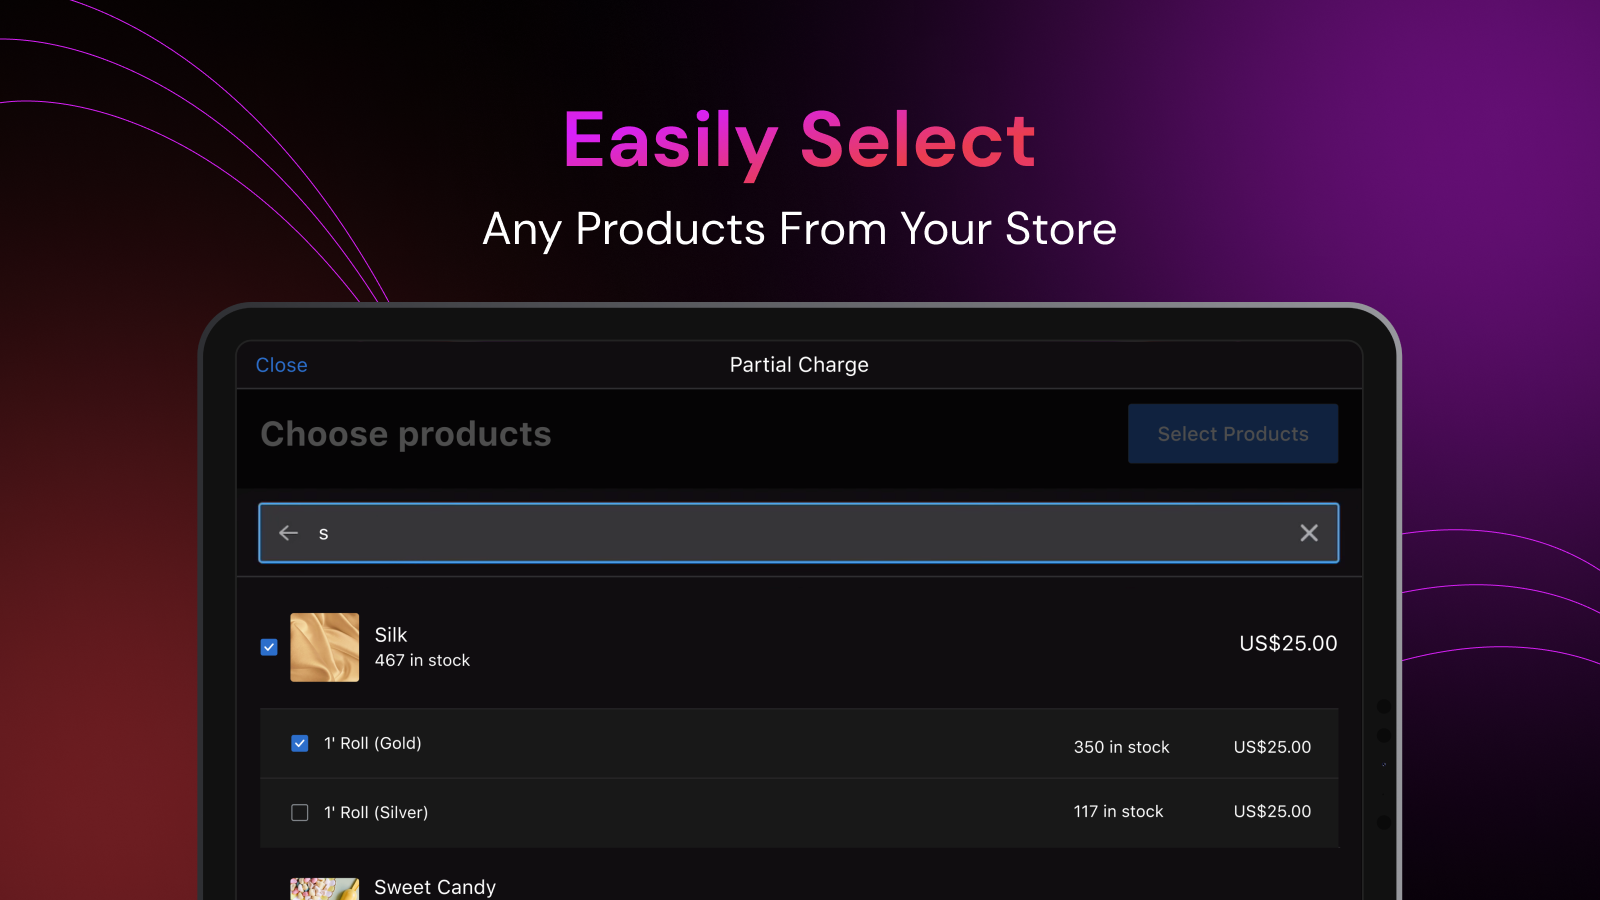 Easily select any products from your store